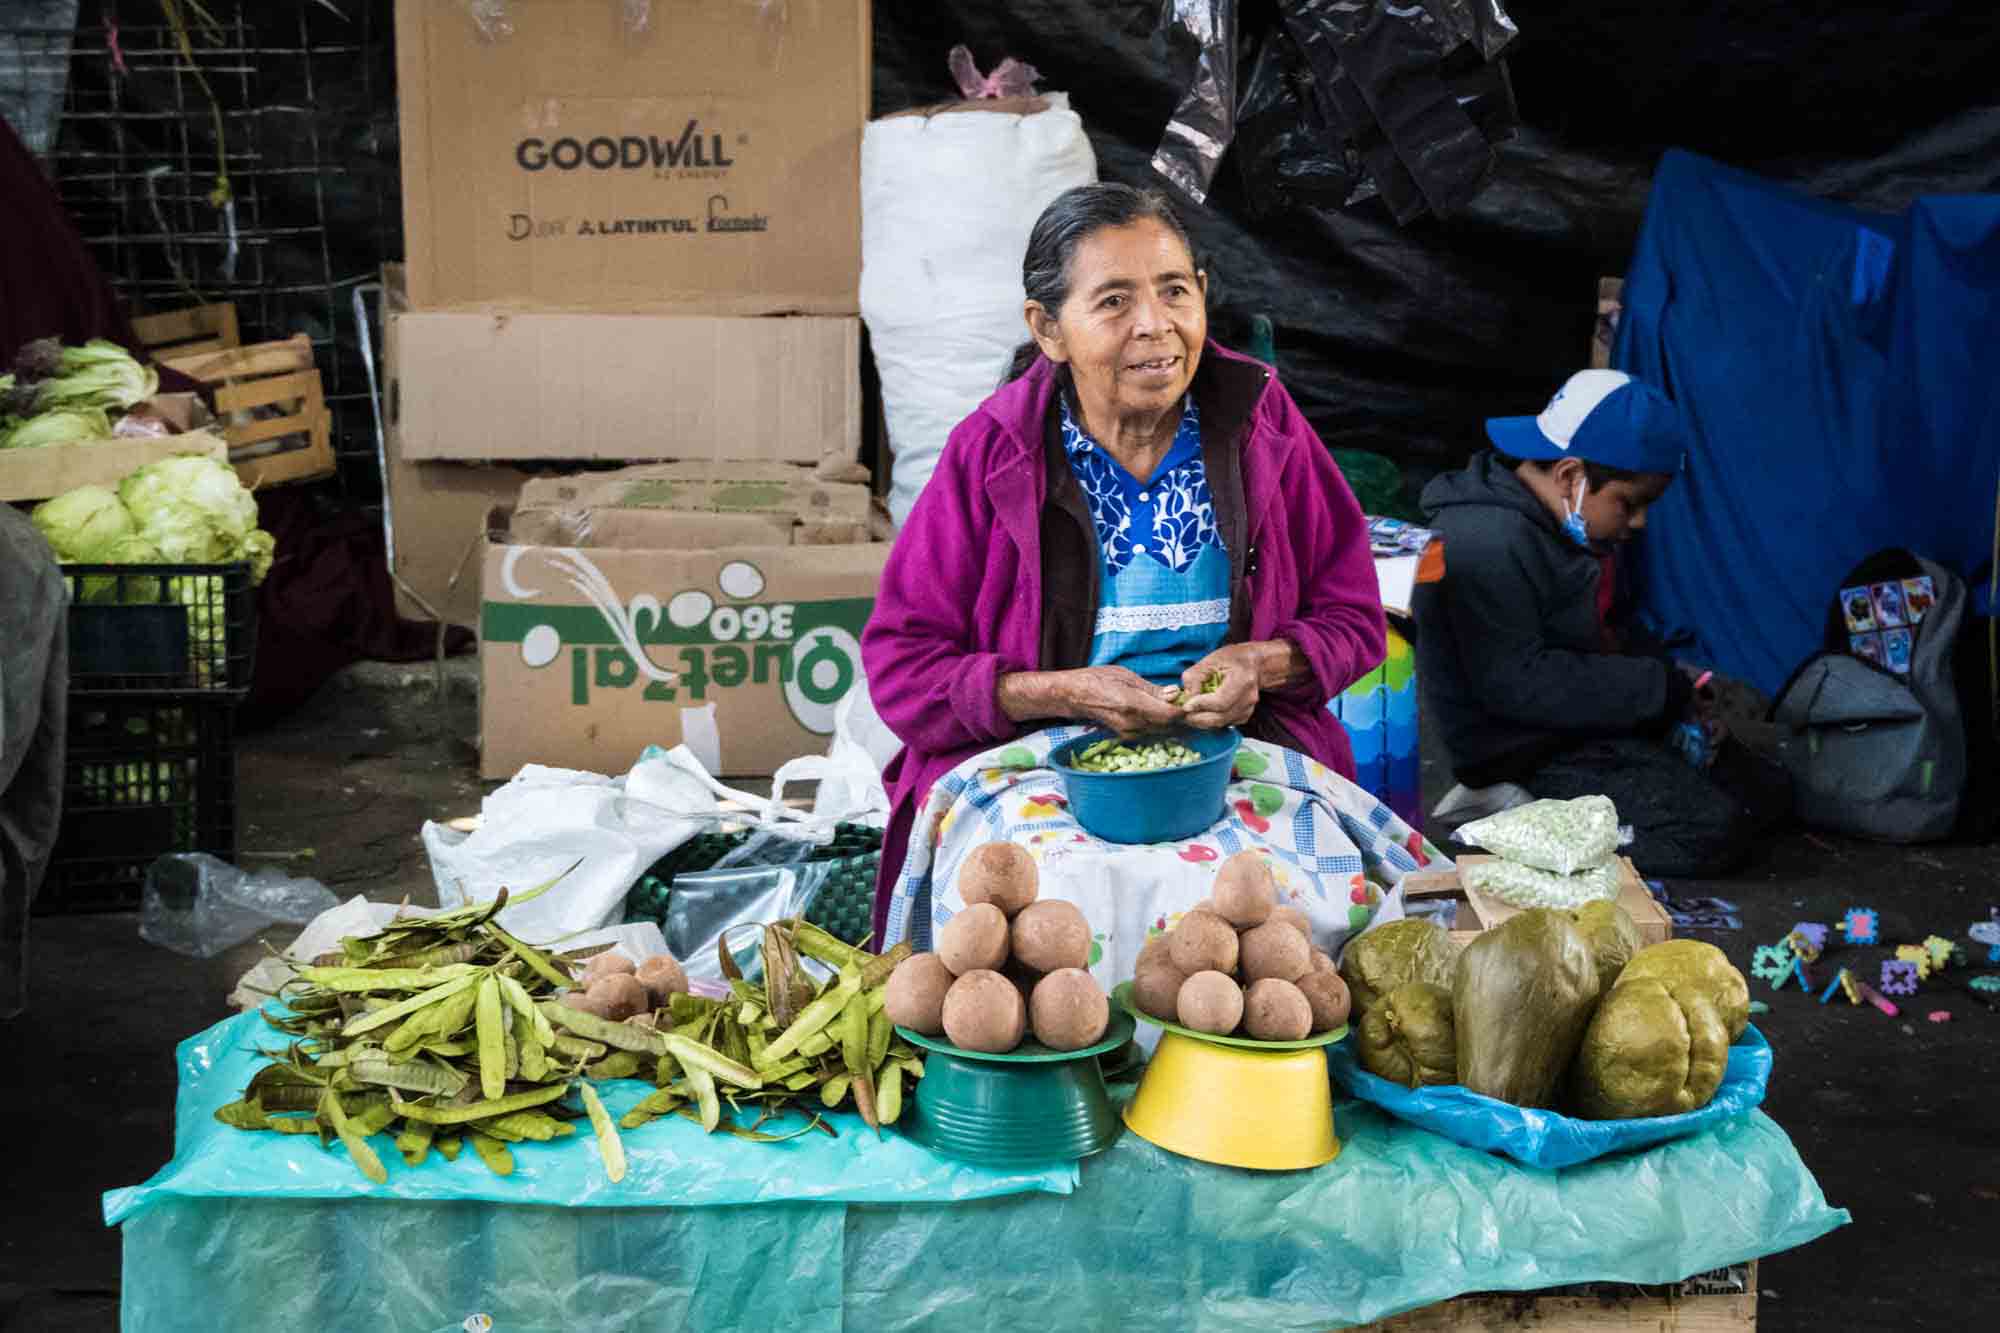 A woman sells produce on a table in the Oaxaca market